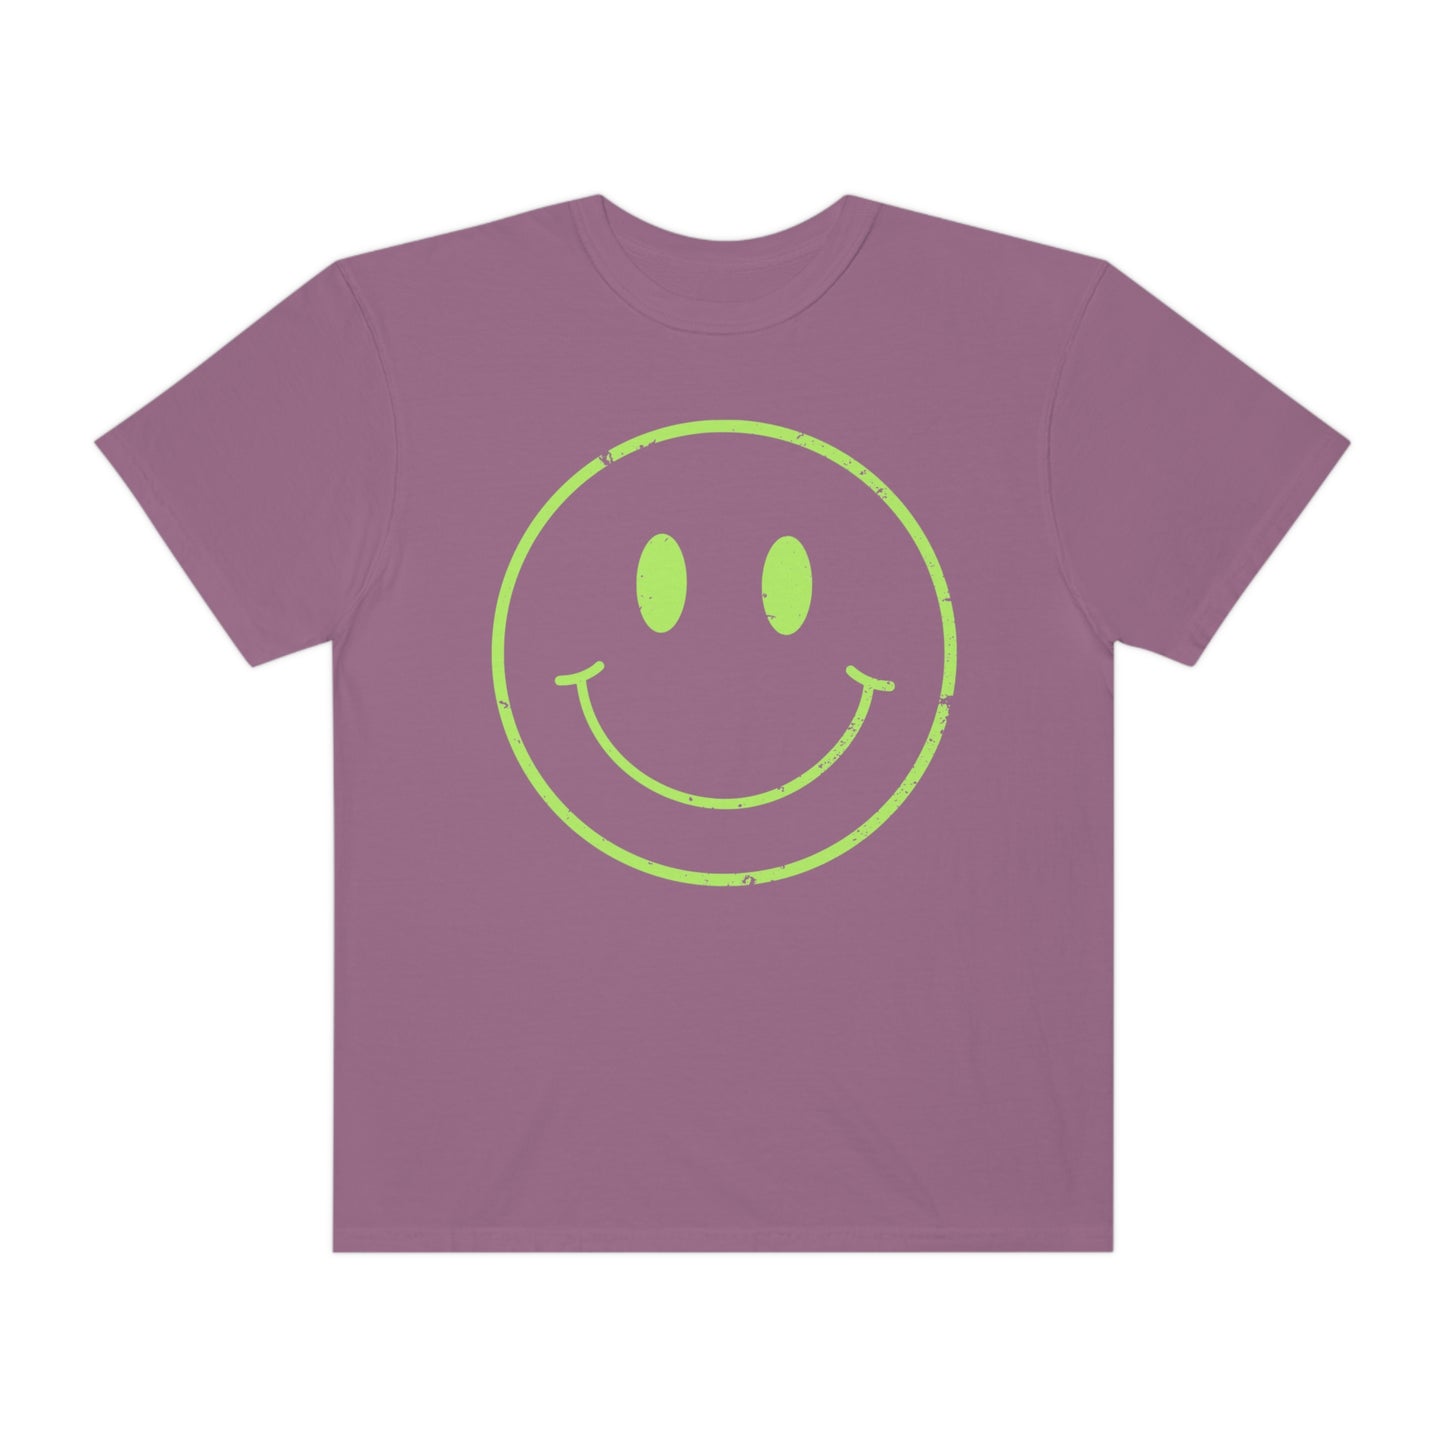 Distressed Neon Smiley Face Tee, Be Happy Shirt, Large Smiley Face Shirt, Trendy Retro Shirt for Women or Men, Gift for Women, Gift for Teen